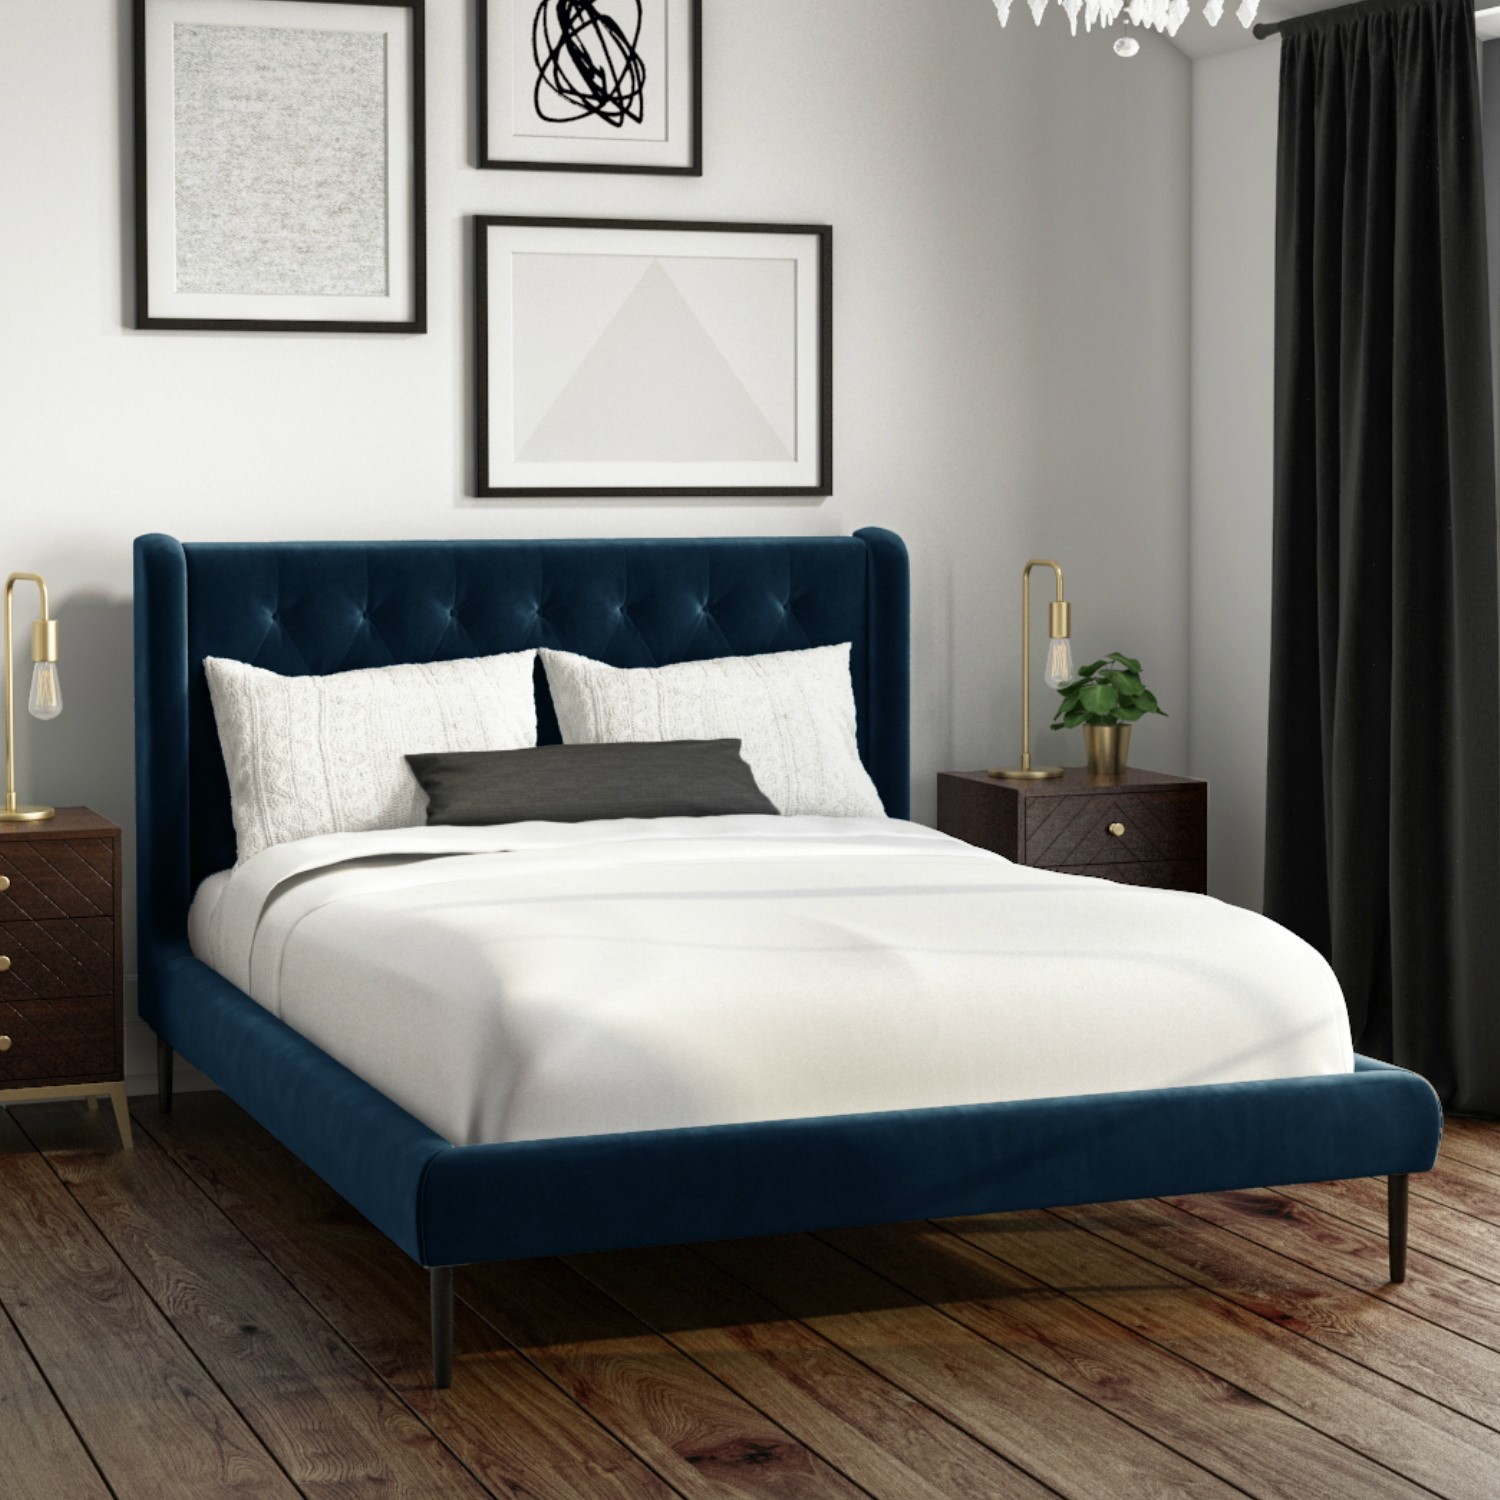 Navy Velvet King Size Bed Frame With, King Size Bed Size In Ft